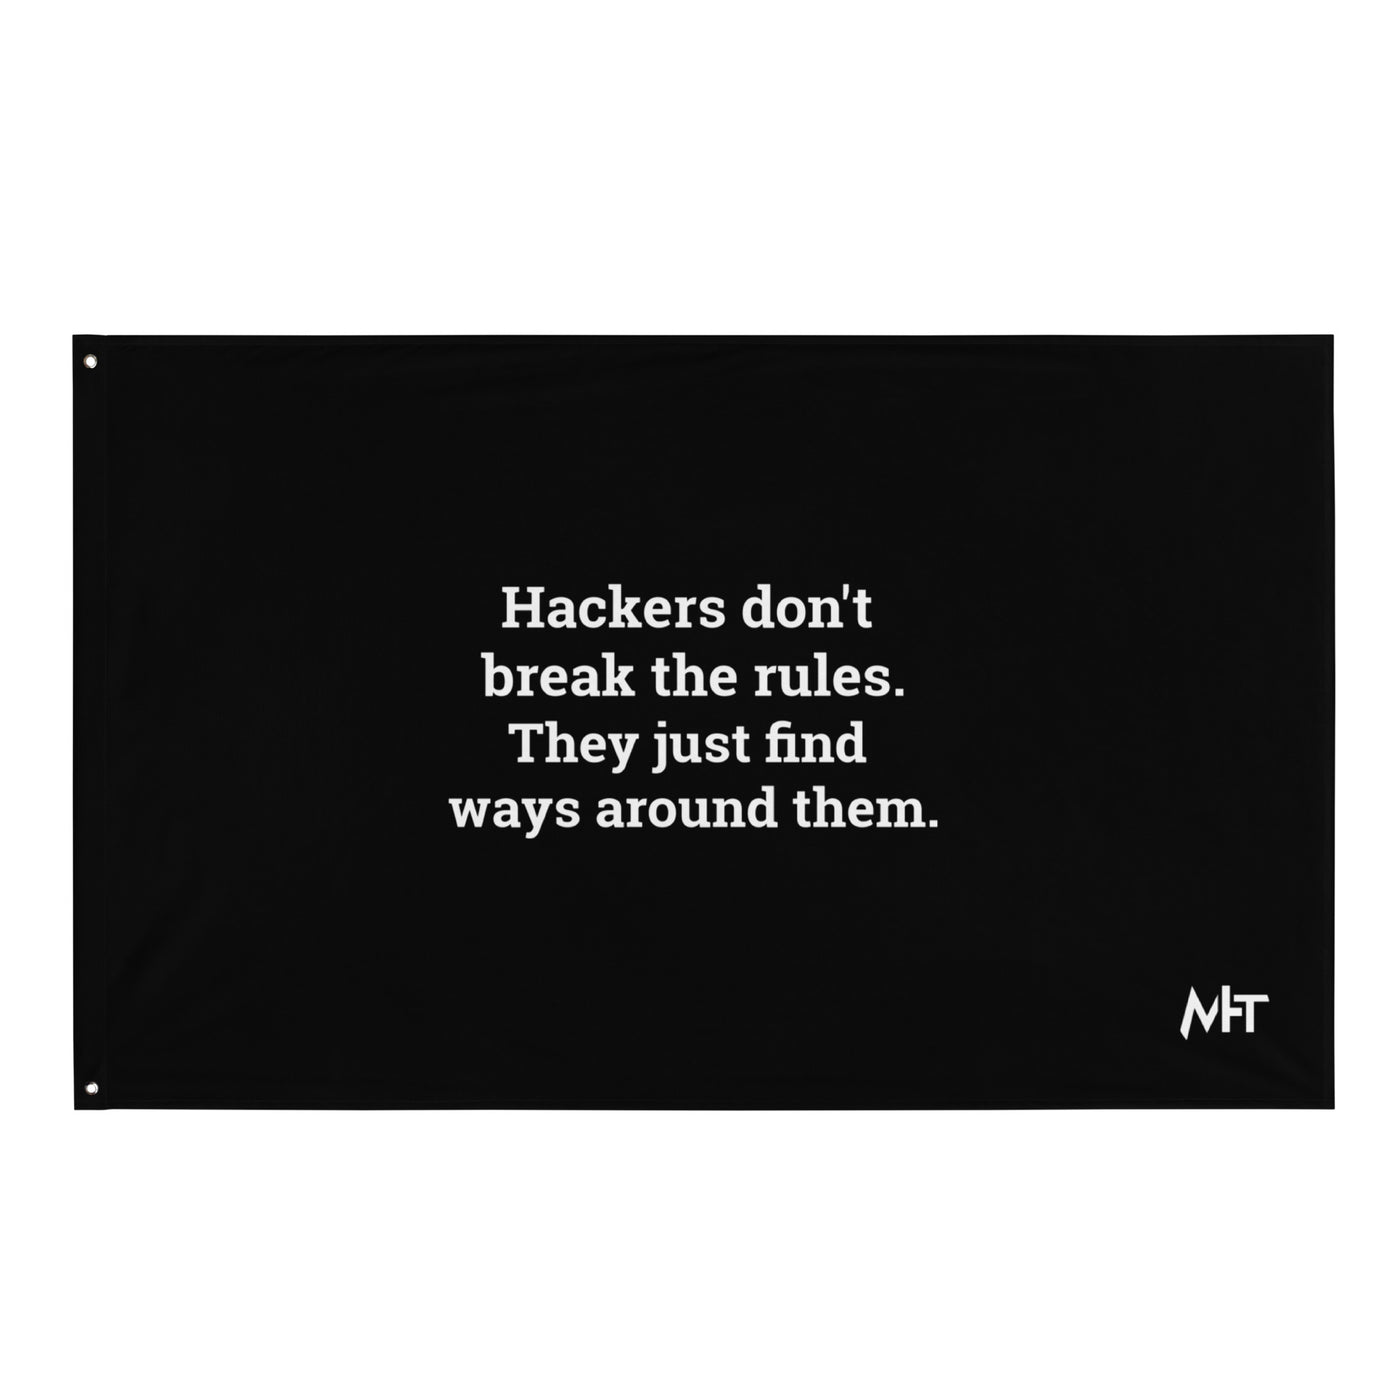 Hackers don't break the rules, they just find ways around them - Flag